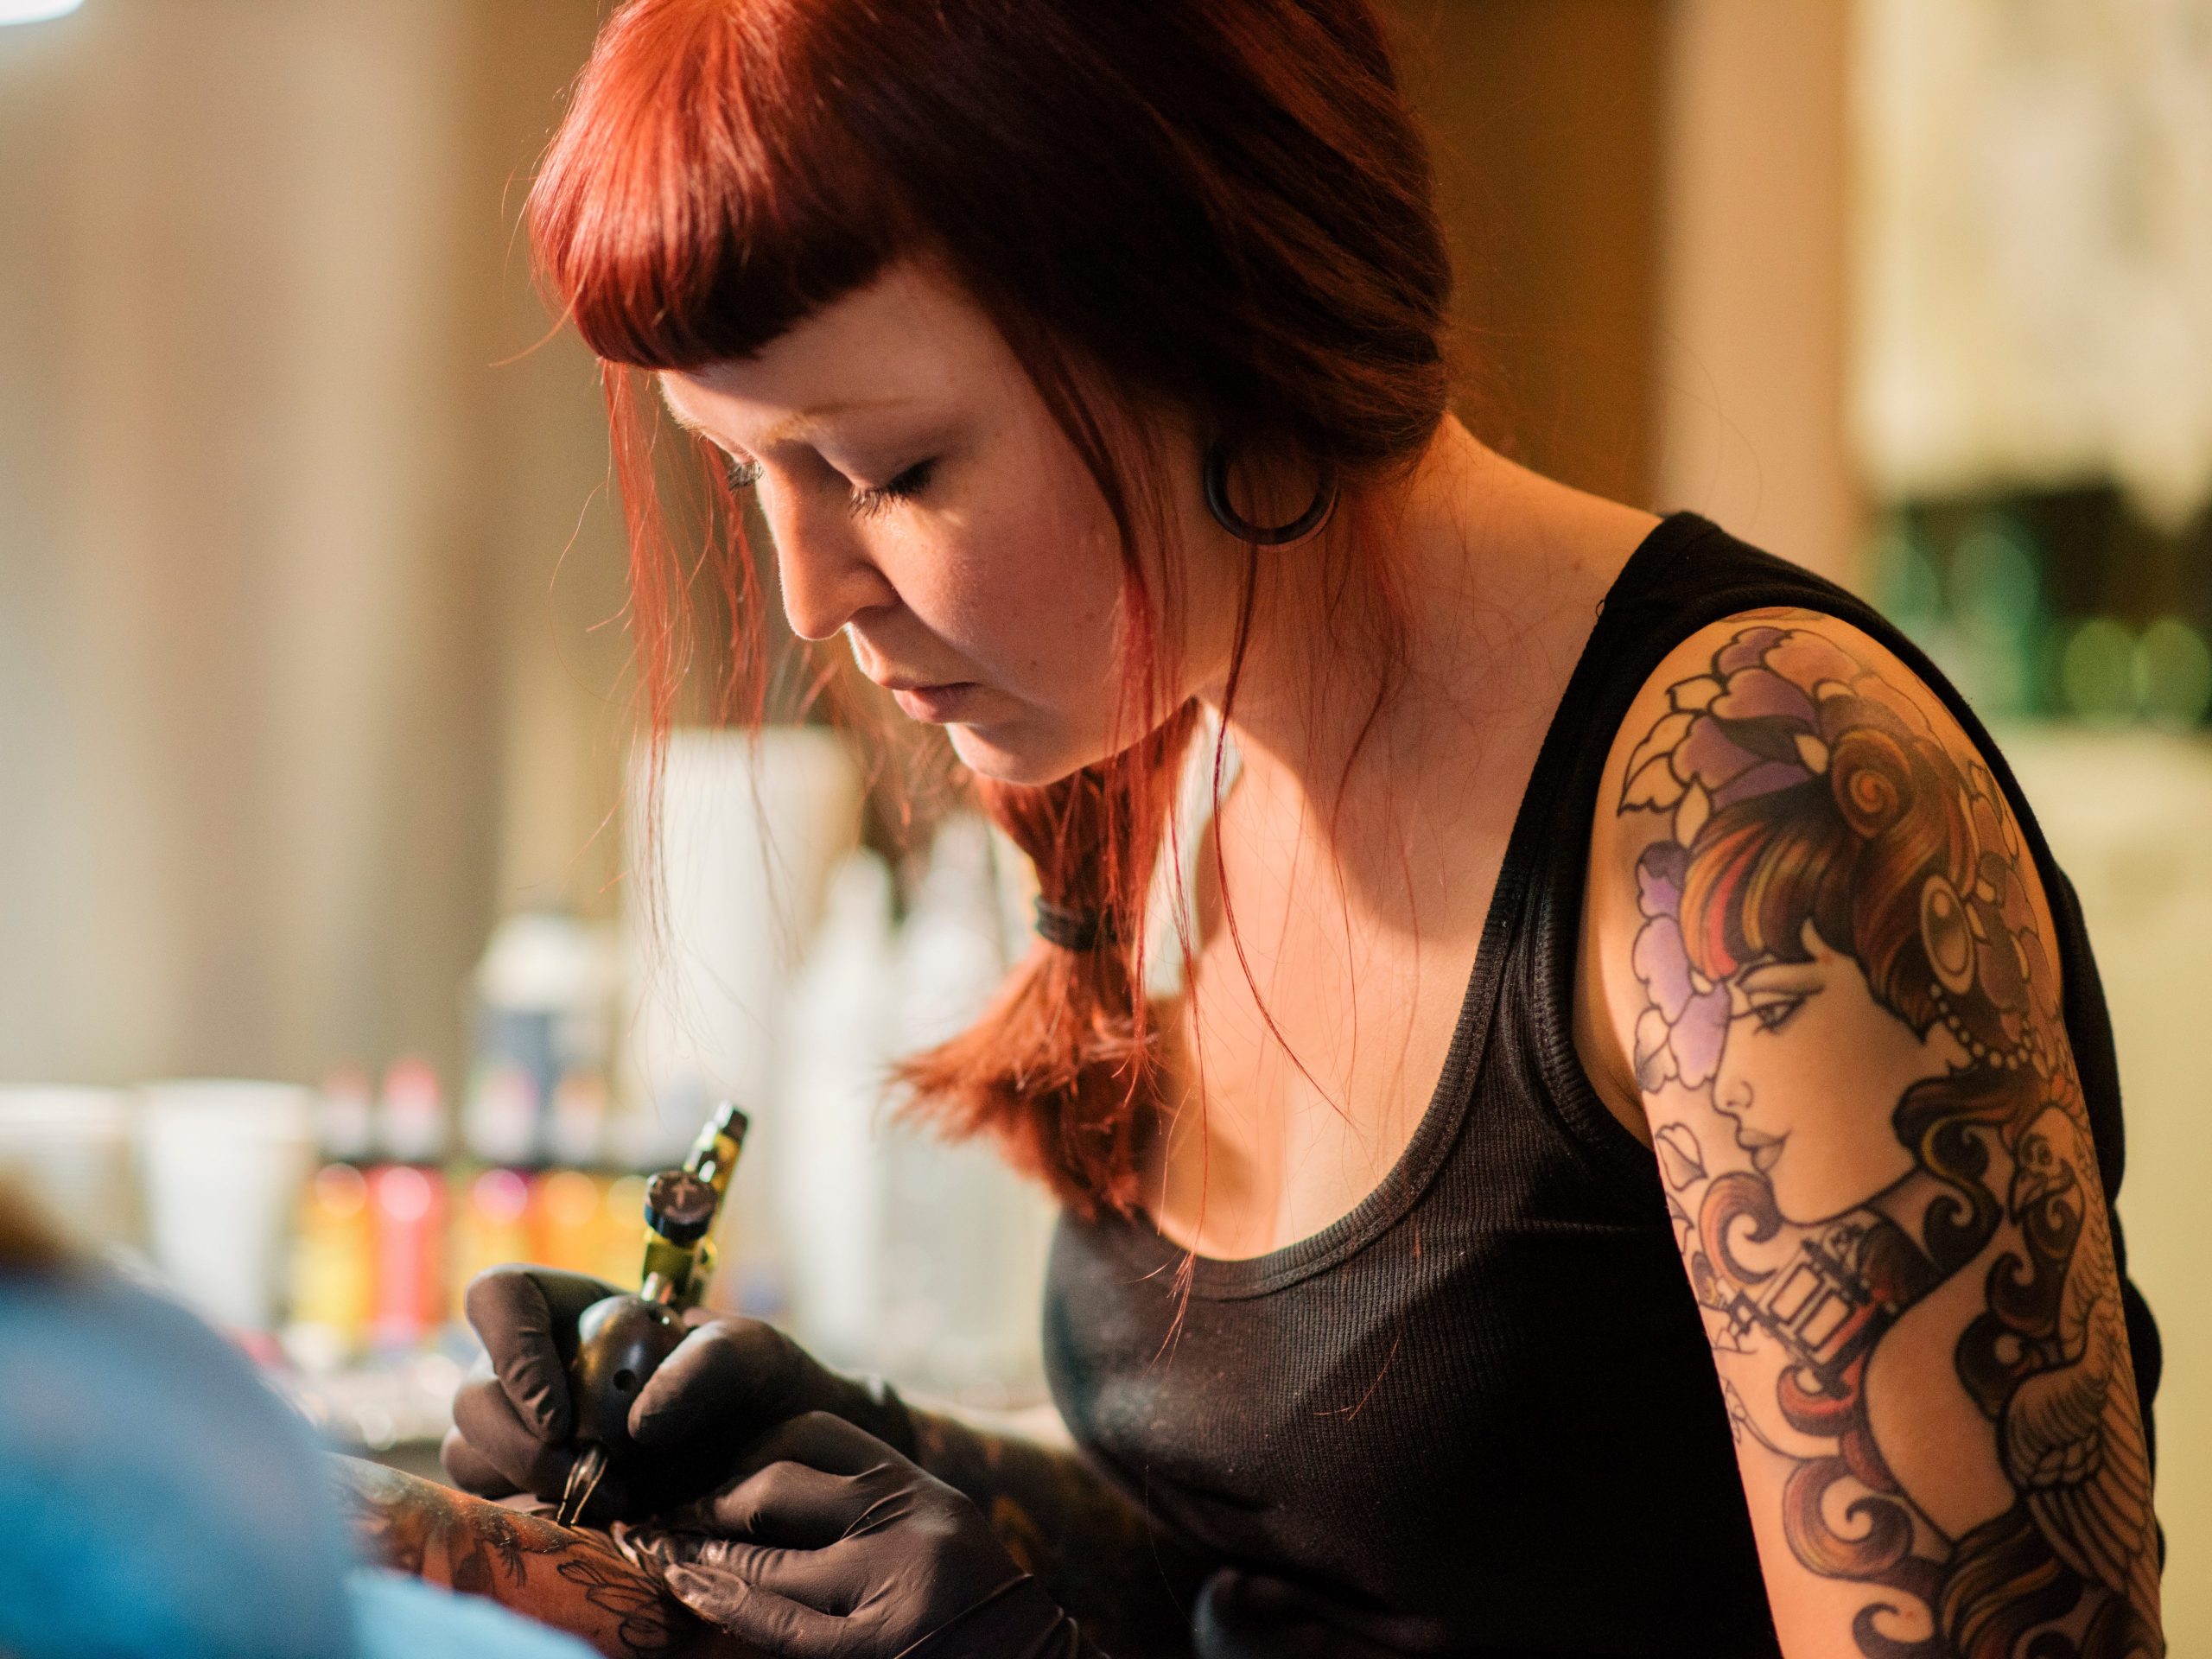 Tattoo parlour: 5 things to know about the tattooist's job